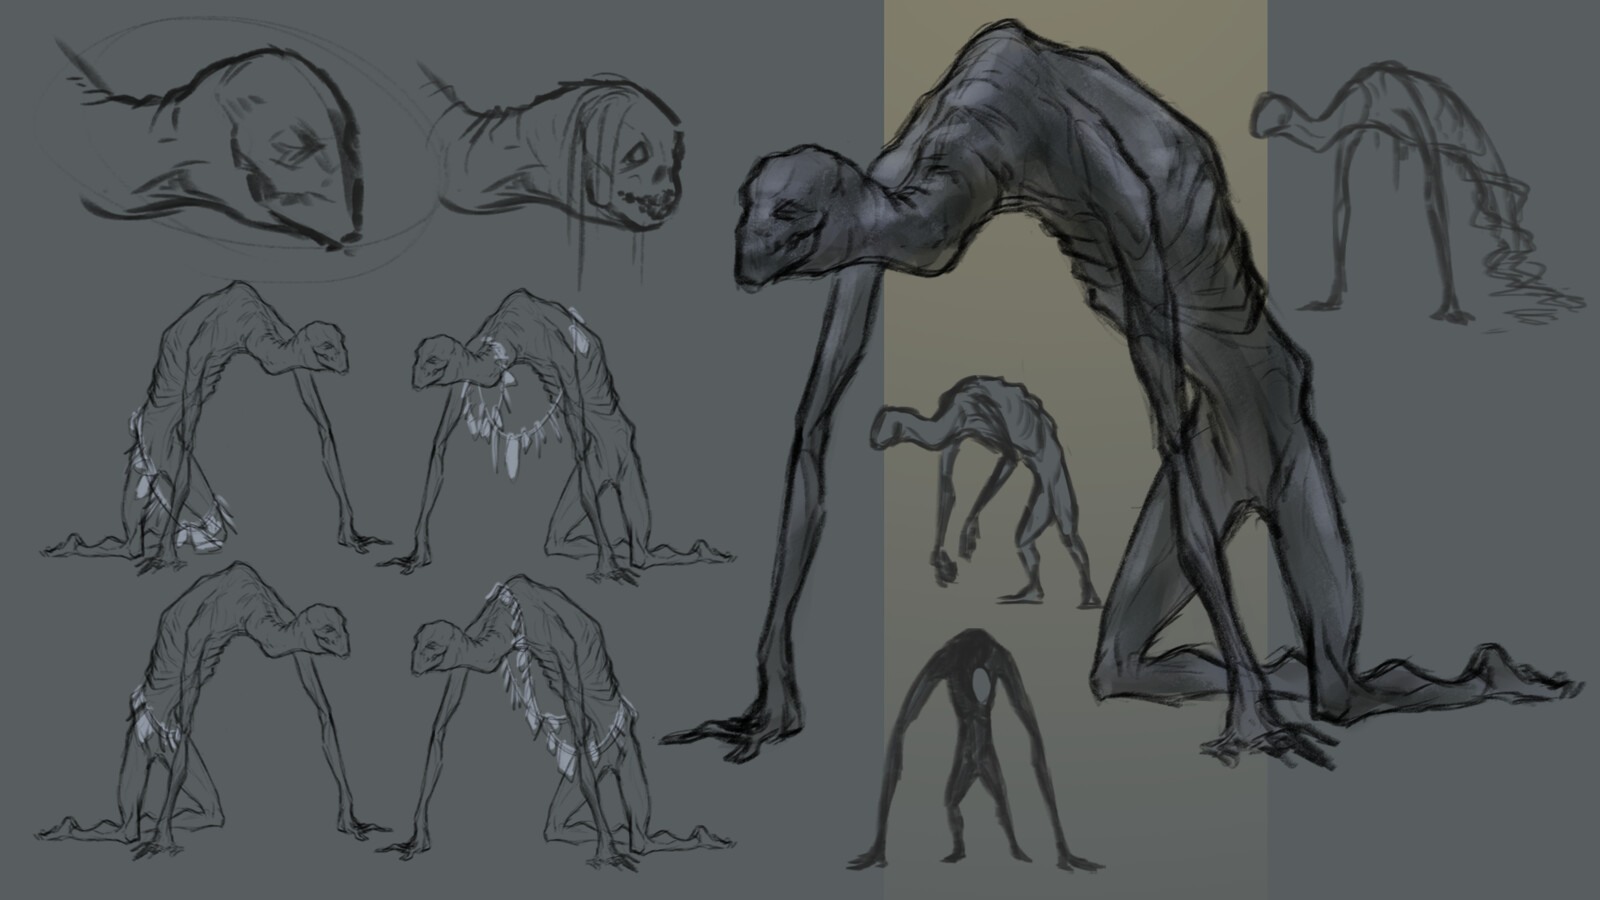 Sketches of the monsters